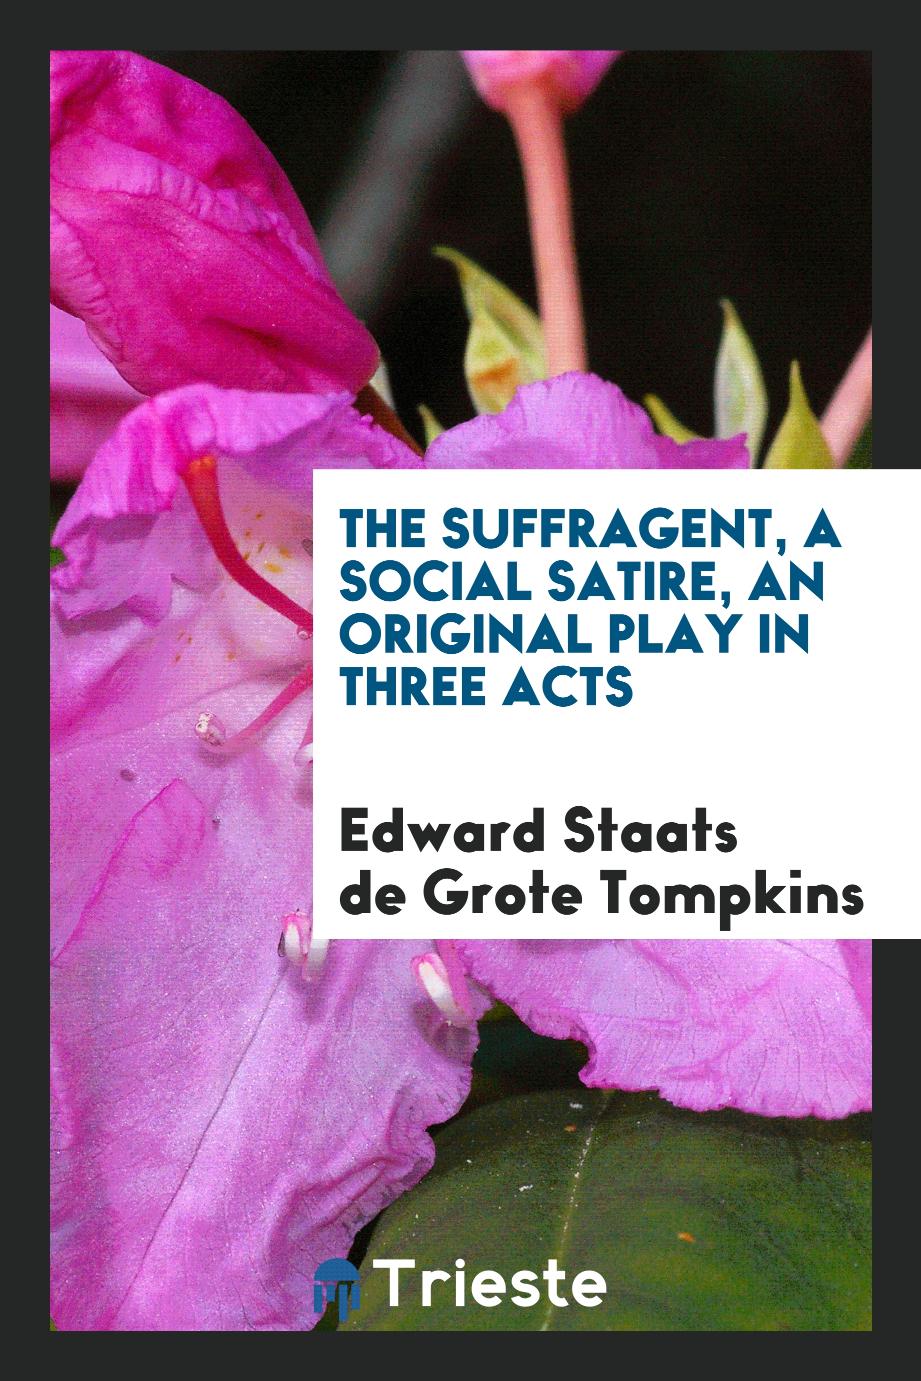 The Suffragent, a Social Satire, an Original Play in Three Acts